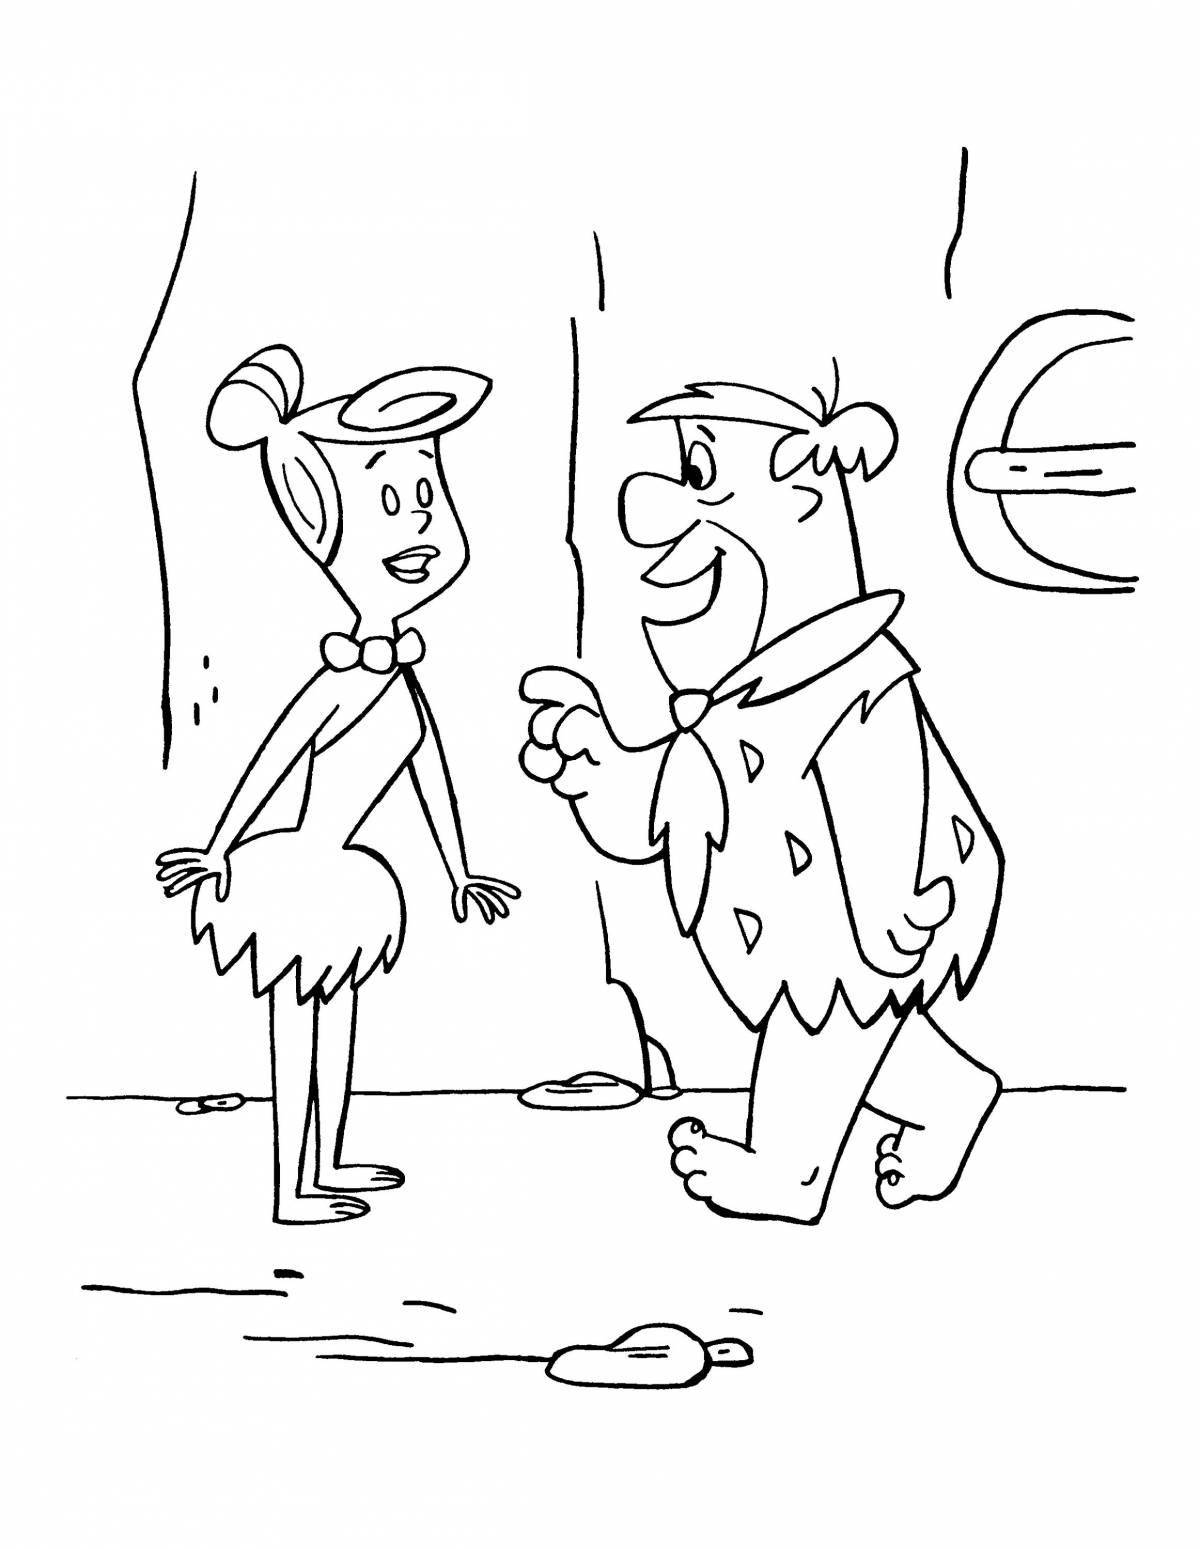 Interesting fred flintstone coloring page